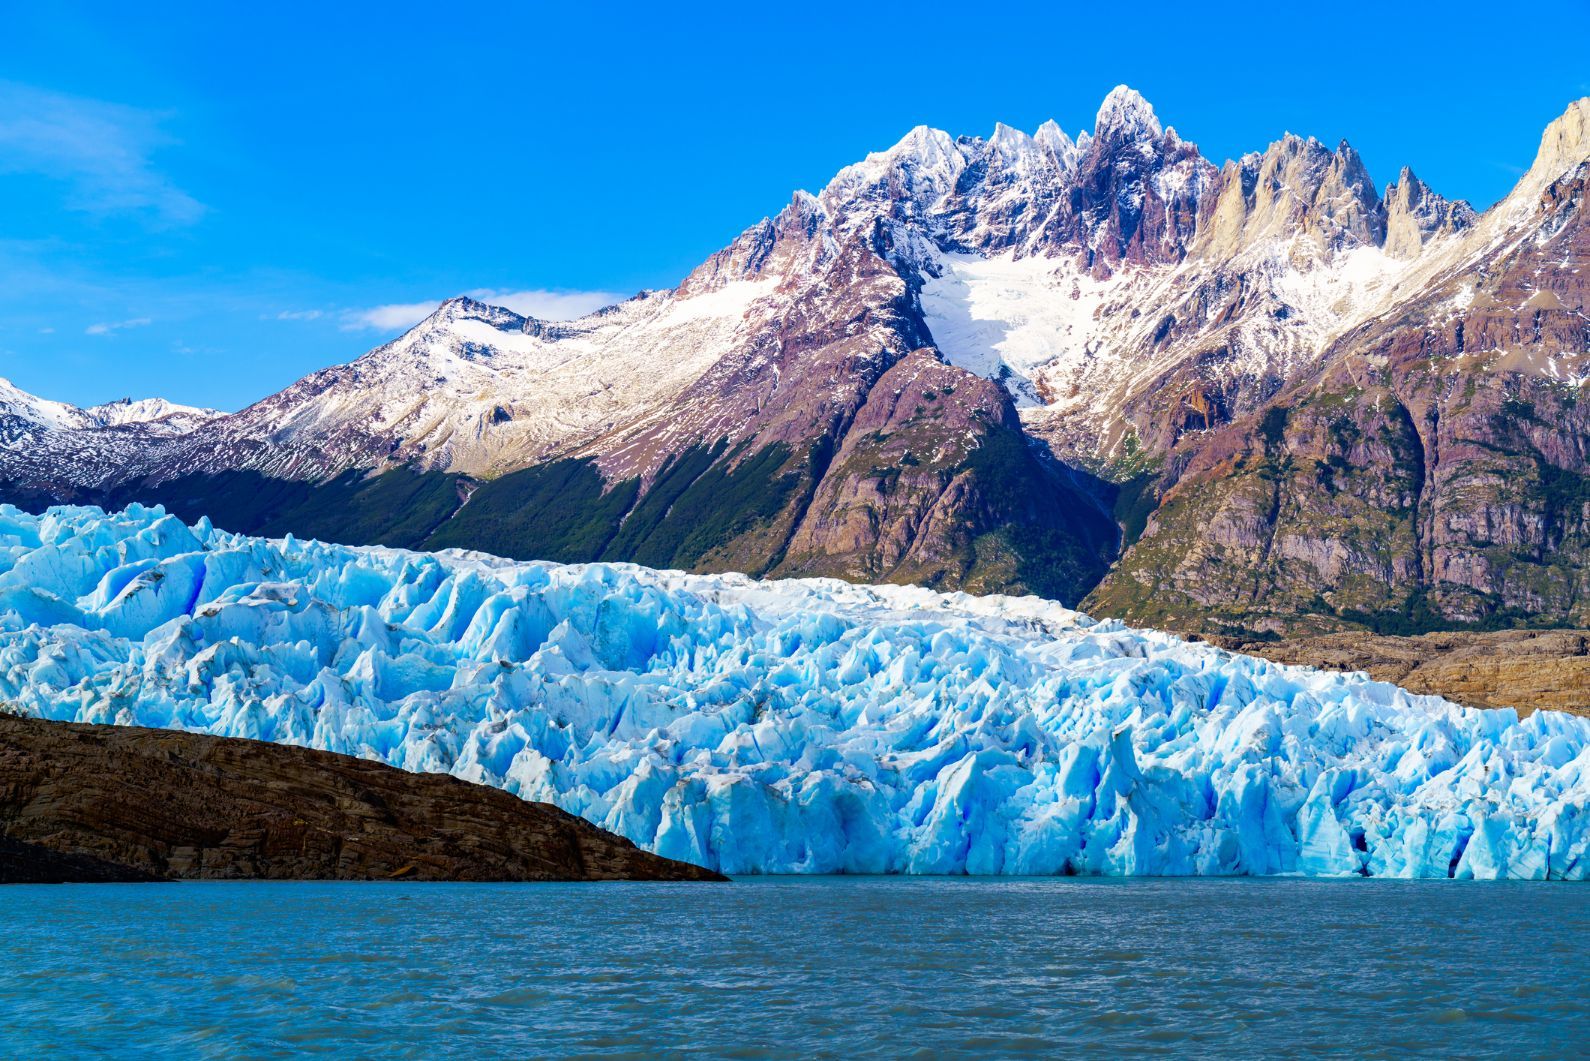 Grey glacier is commonly regarded as one of the most beautiful glaciers in the world.